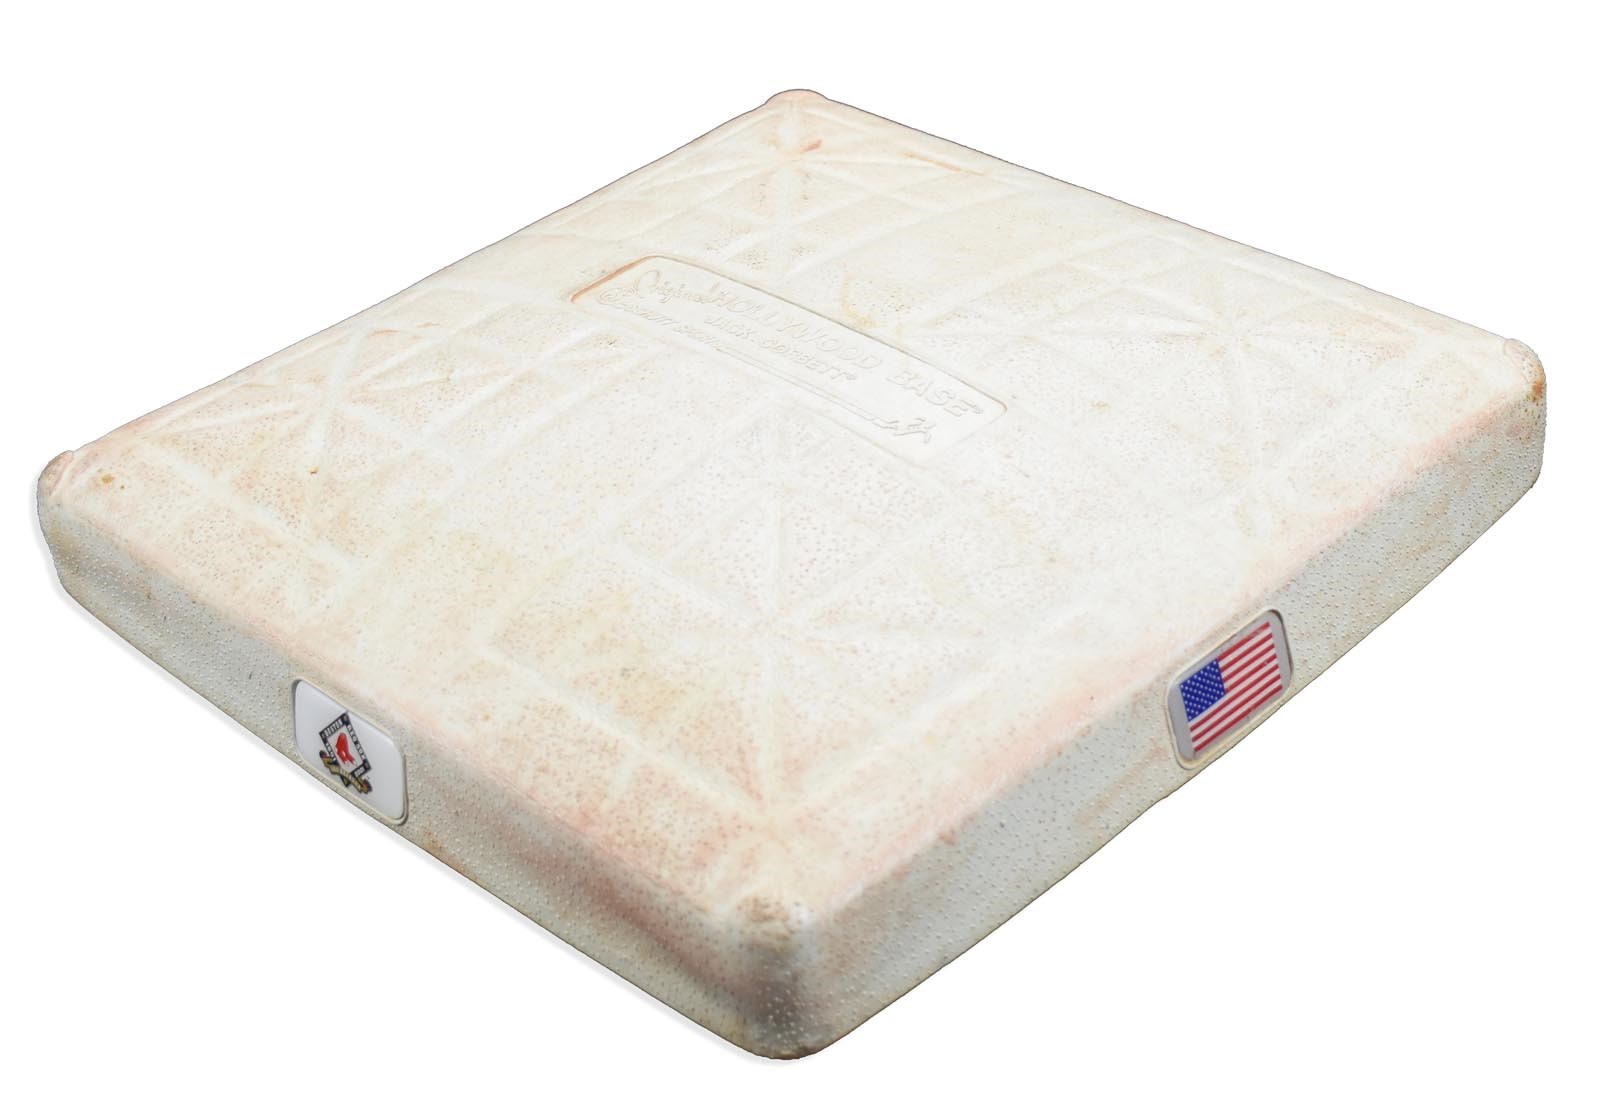 Boston Sports - Rare 2001 Boston Red Sox Fenway Park Post 9/11 Game Used 3rd Base